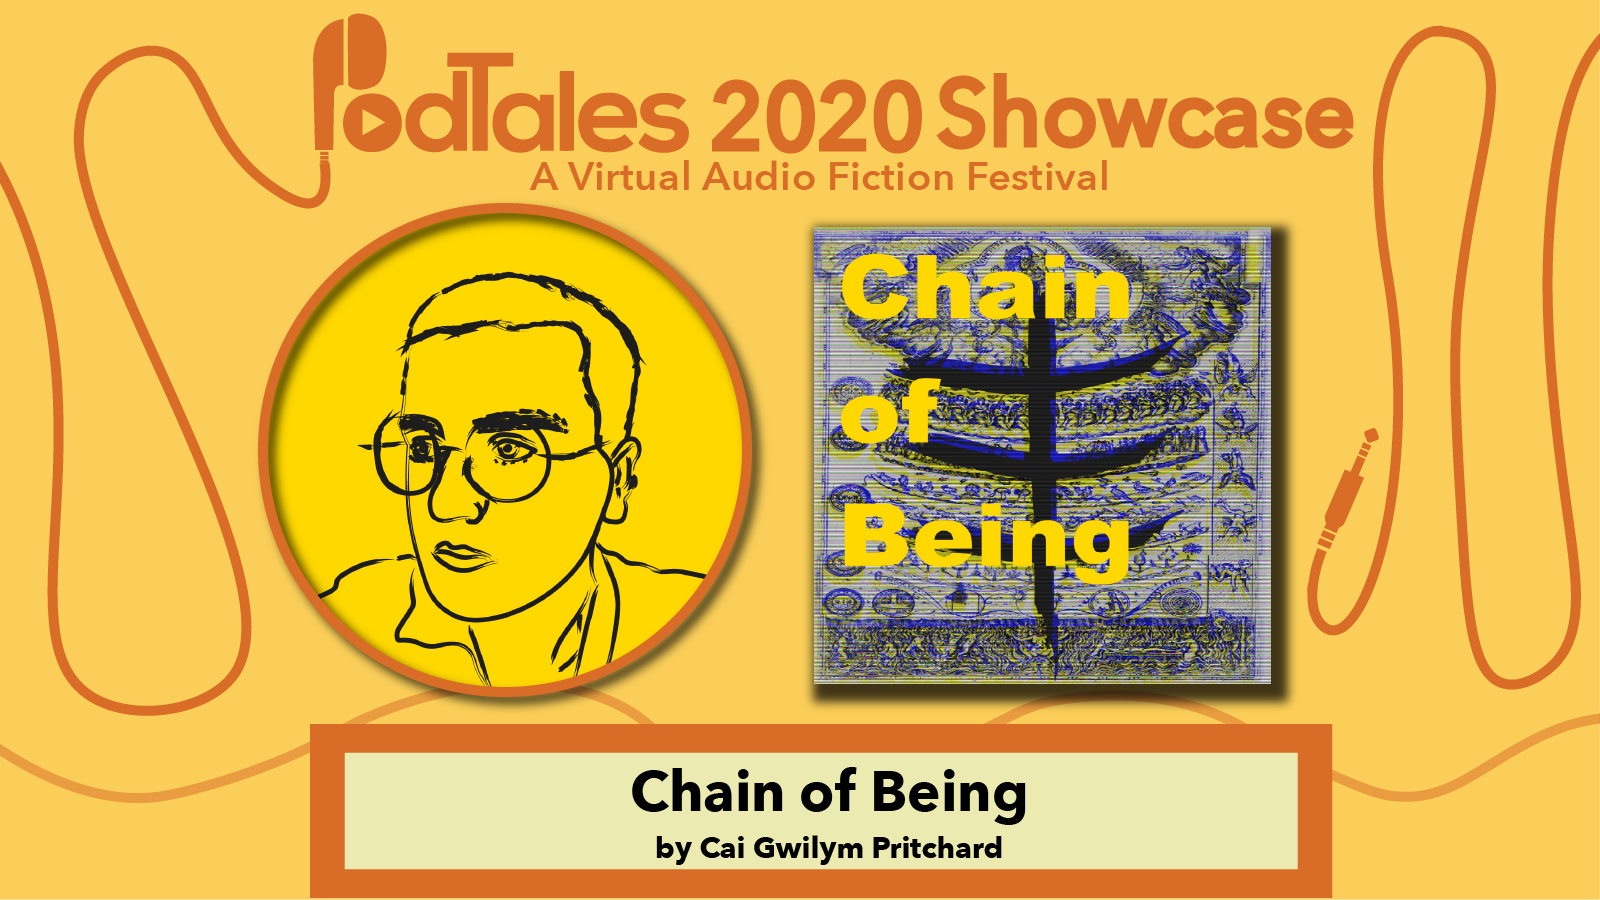 Text reading “PodTales 2020 Showcase: A Virtual Audio Fiction Festival”, Drawing of Cai Gwilym Pritchard, Show Art for Chain of Being, Text reading “Chain of Being by Cai Gwilym Pritchard”